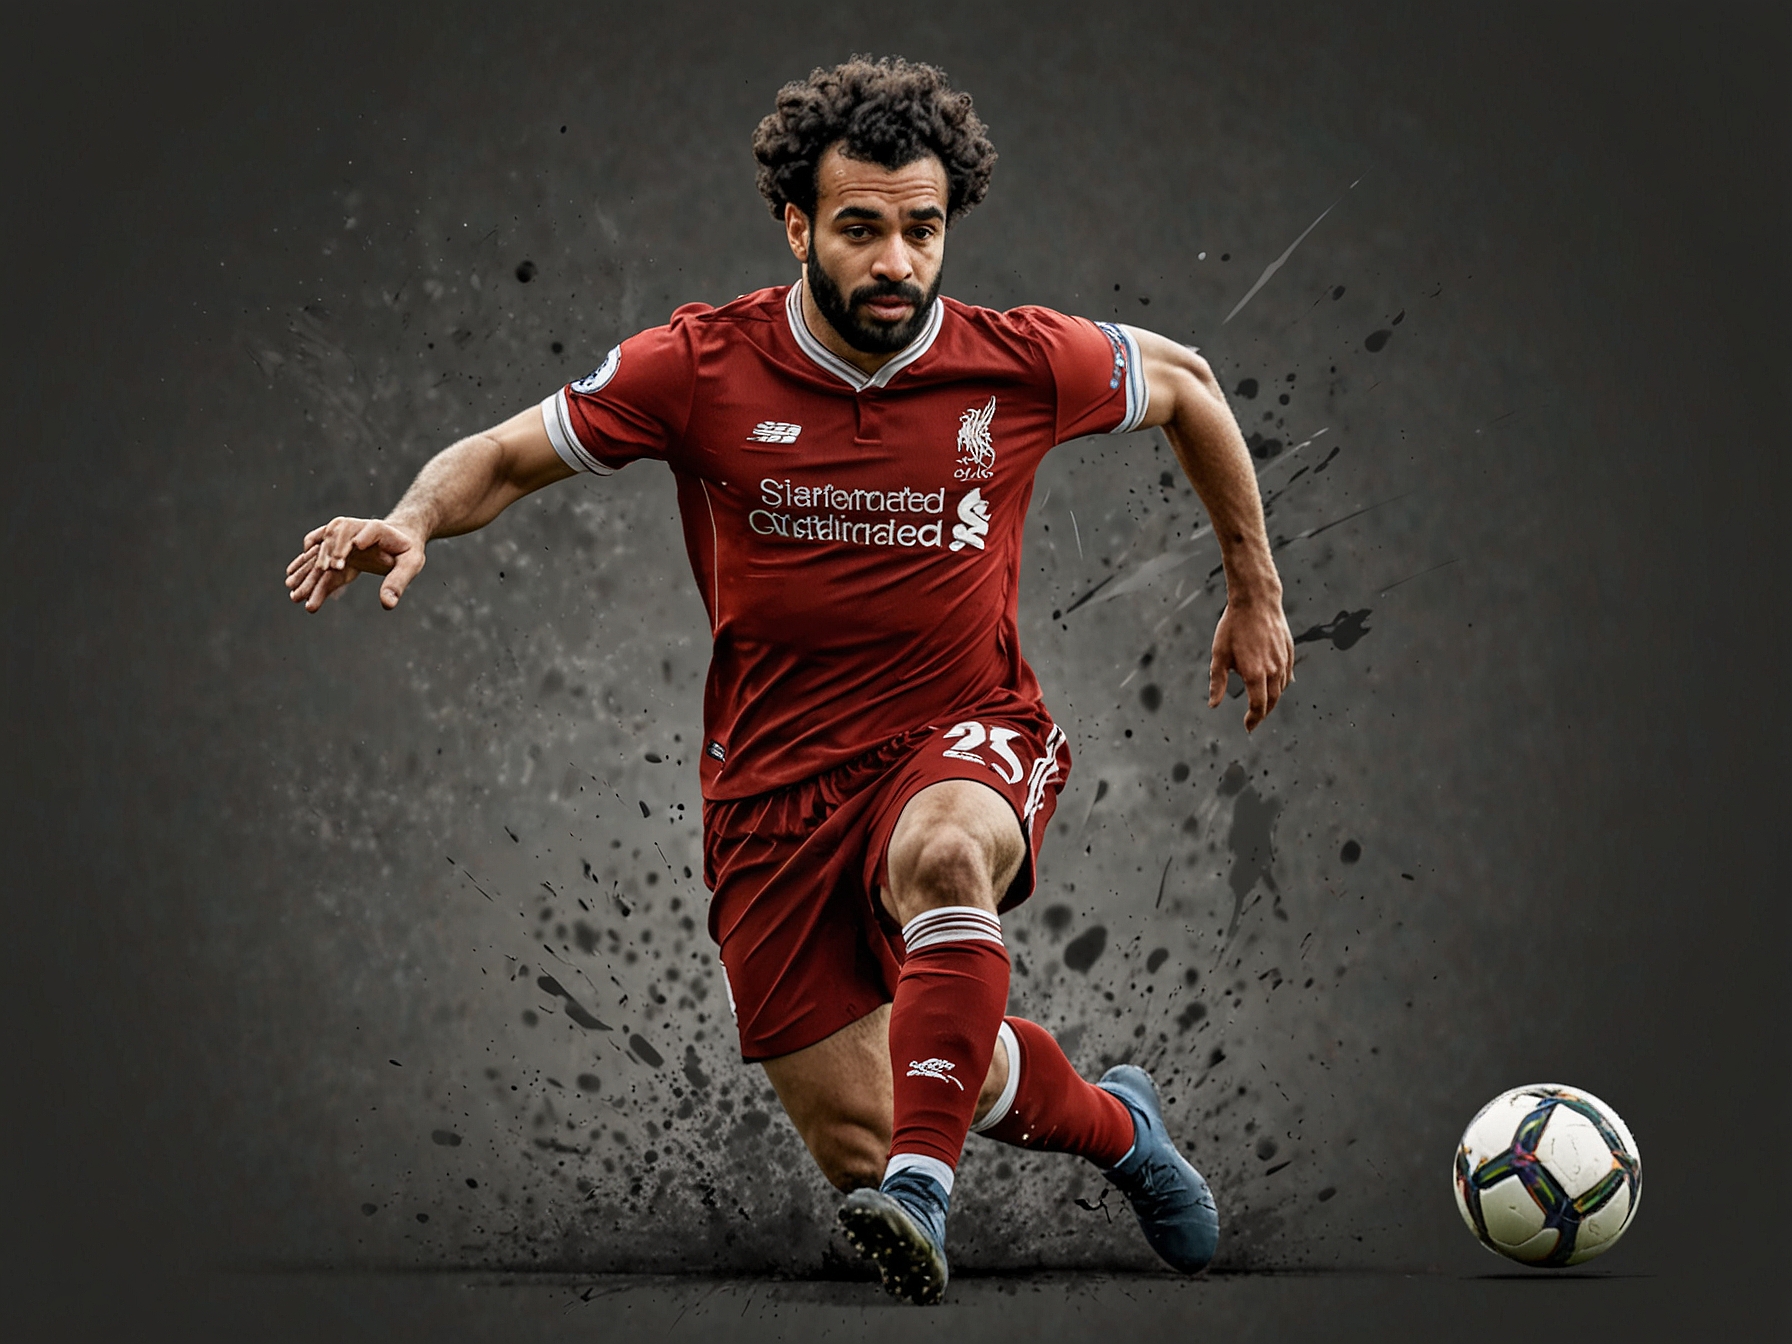 Mohamed Salah in action for Liverpool FC, displaying his speed and agility as he maneuvers past defenders, underscoring why he is considered one of the best footballers in the world.